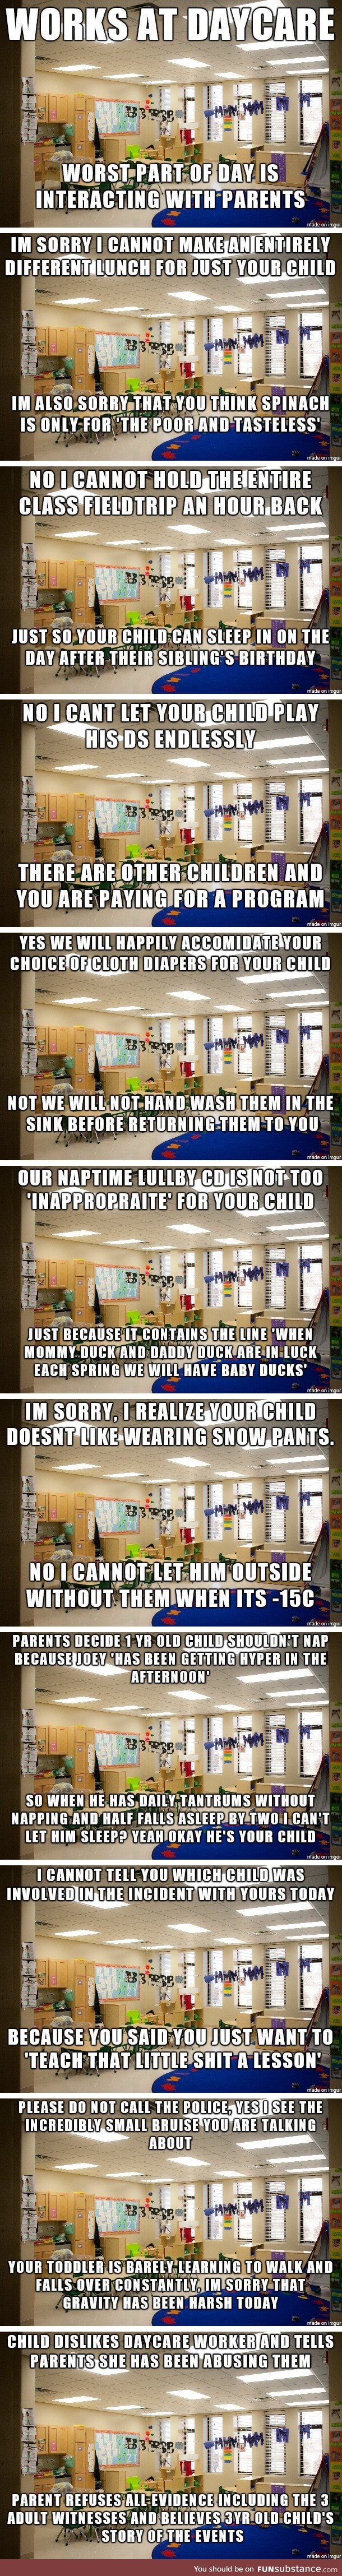 Daycare stories